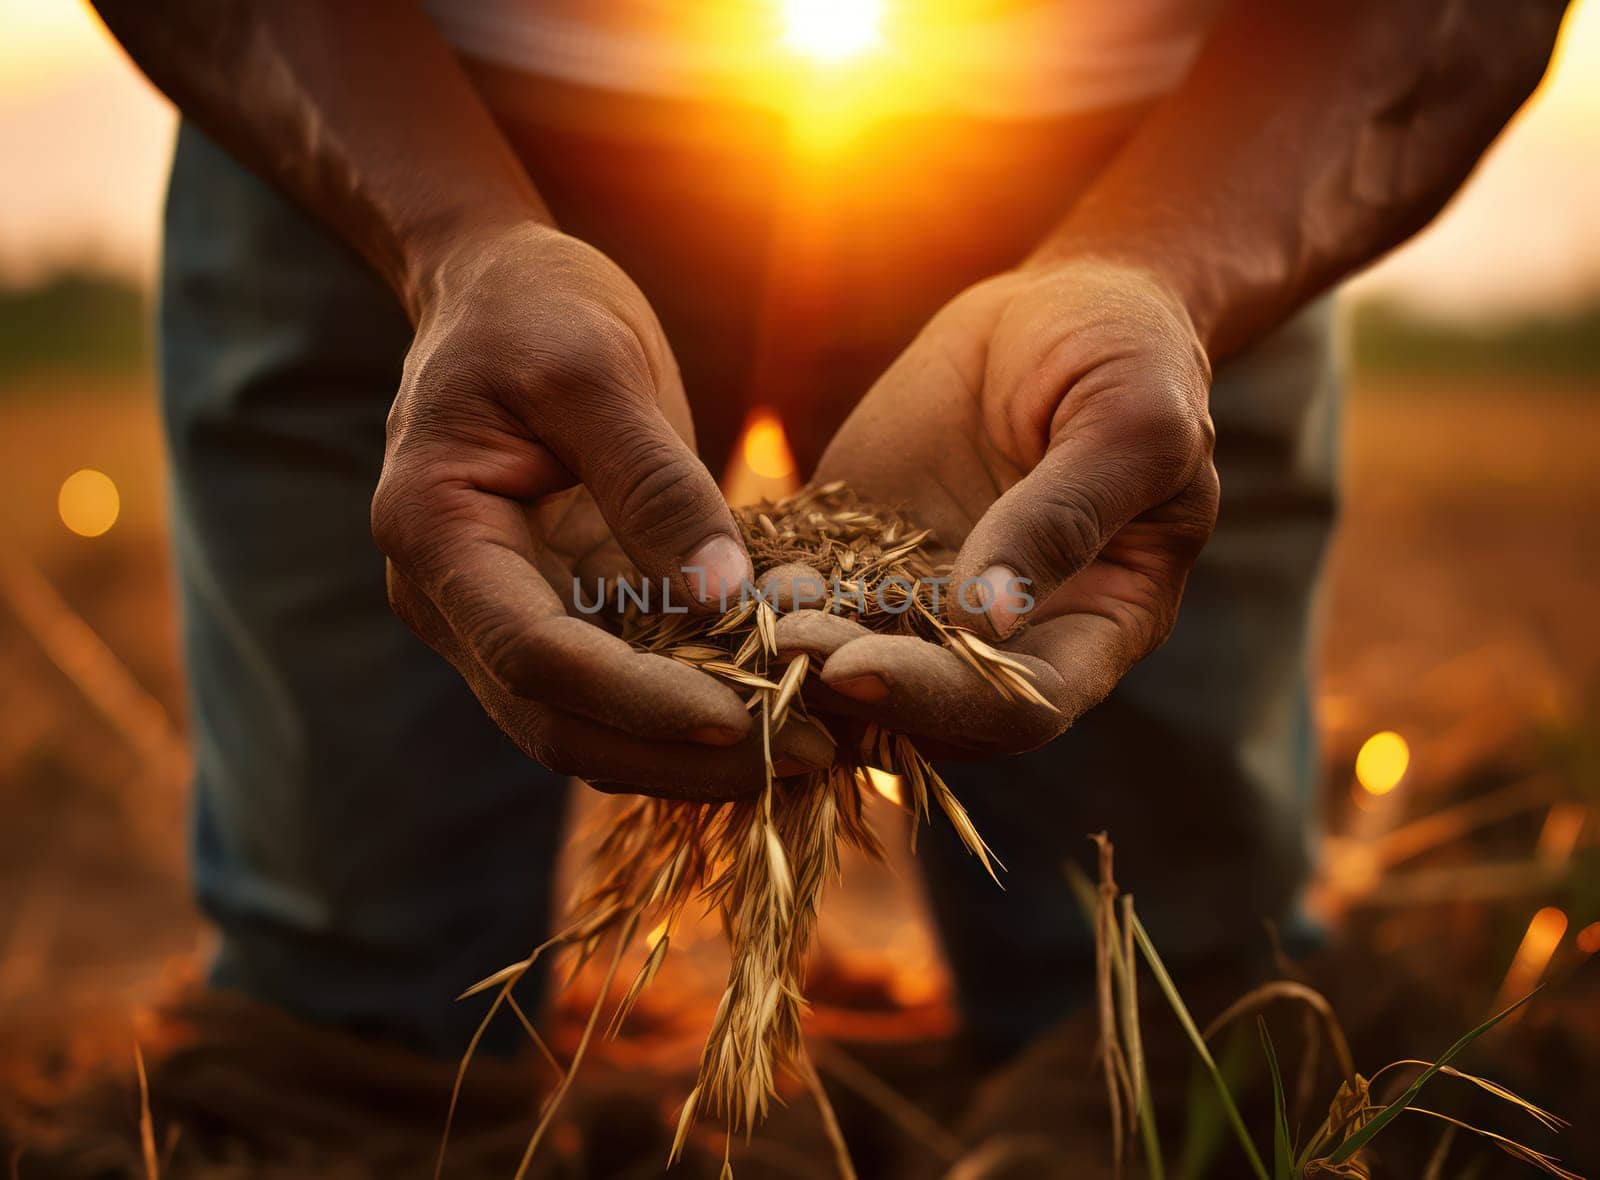 Green Growth: A Farmer's Gentle Hand Planting Organic Seeds in Nature's Care by Vichizh